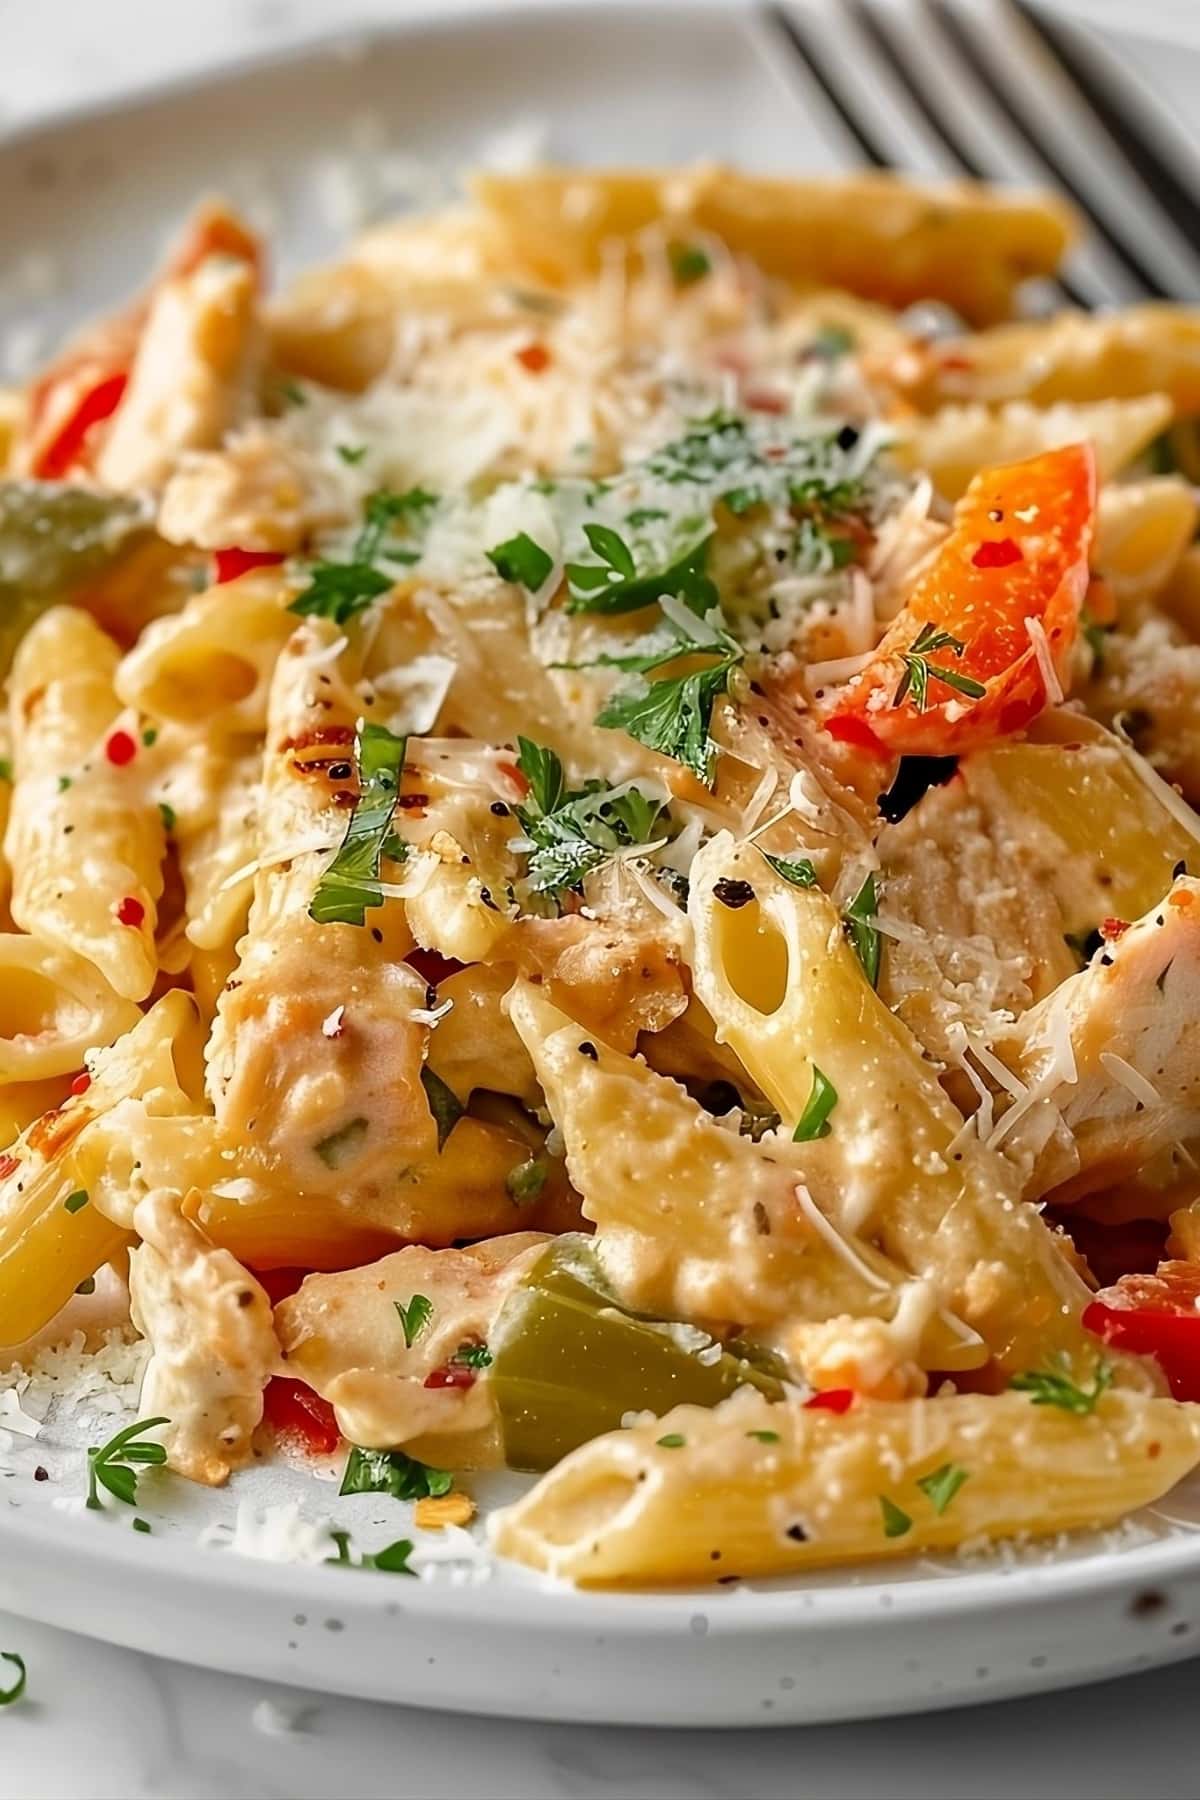 Rattlesnake pasta with chicken, bell peppers, jalapeños, and Parmesan sauce.